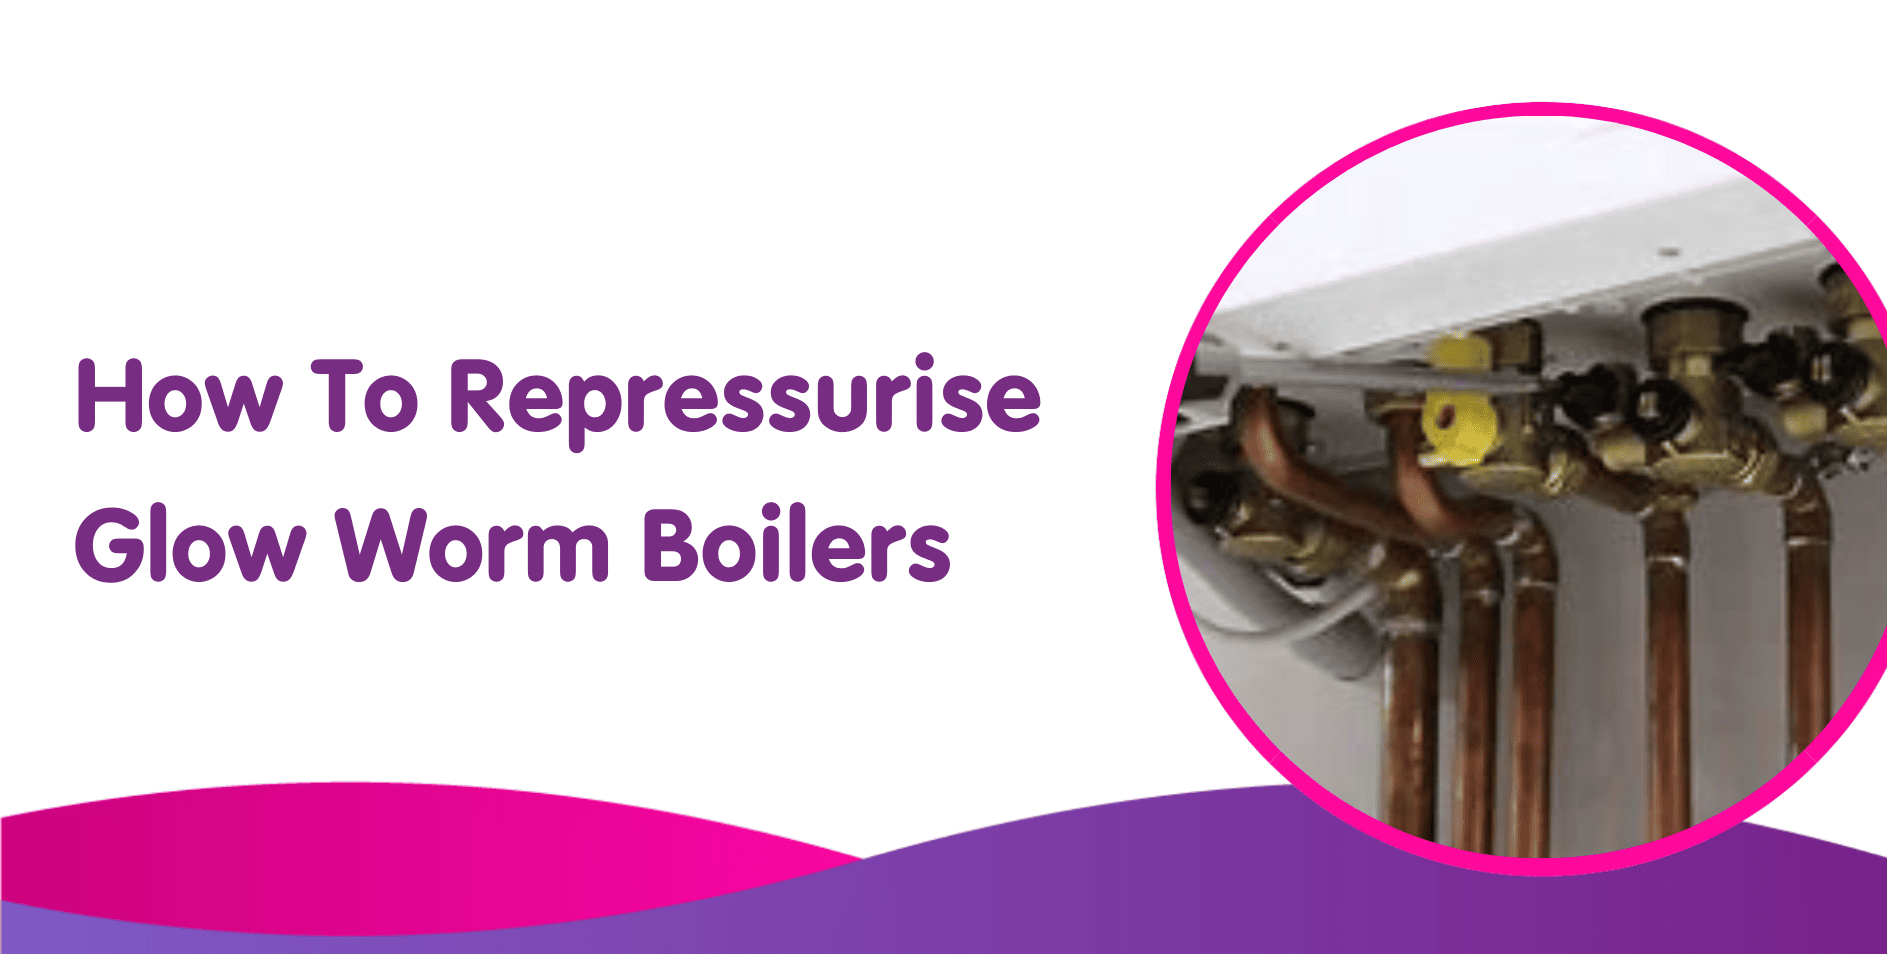 How To Repressurise Glow Worm Boilers